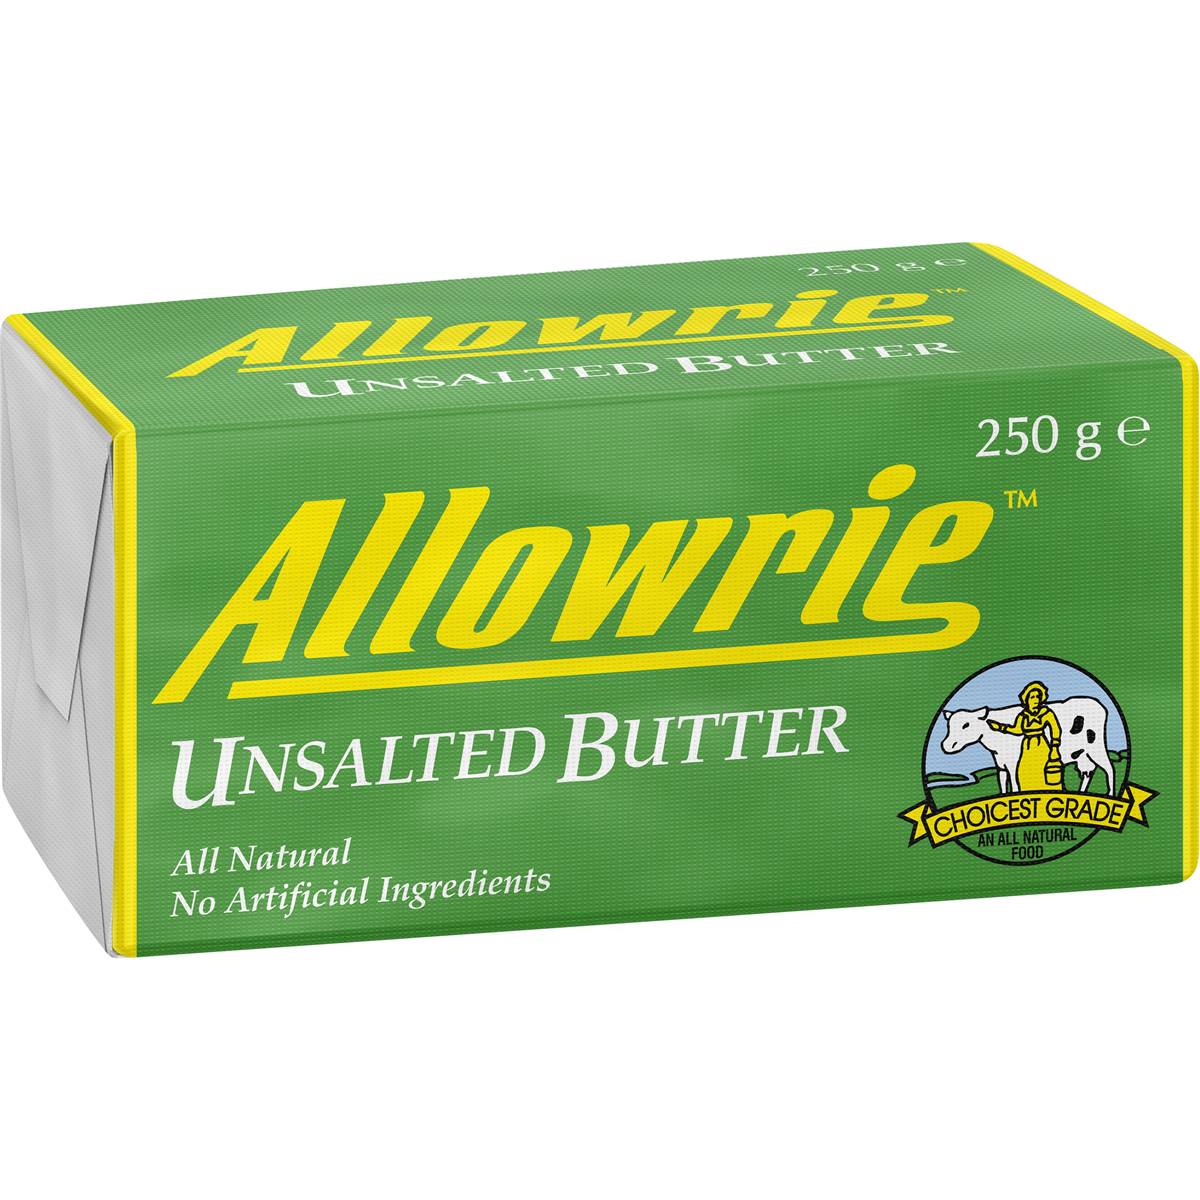 Calories in Allowrie Unsalted Butter